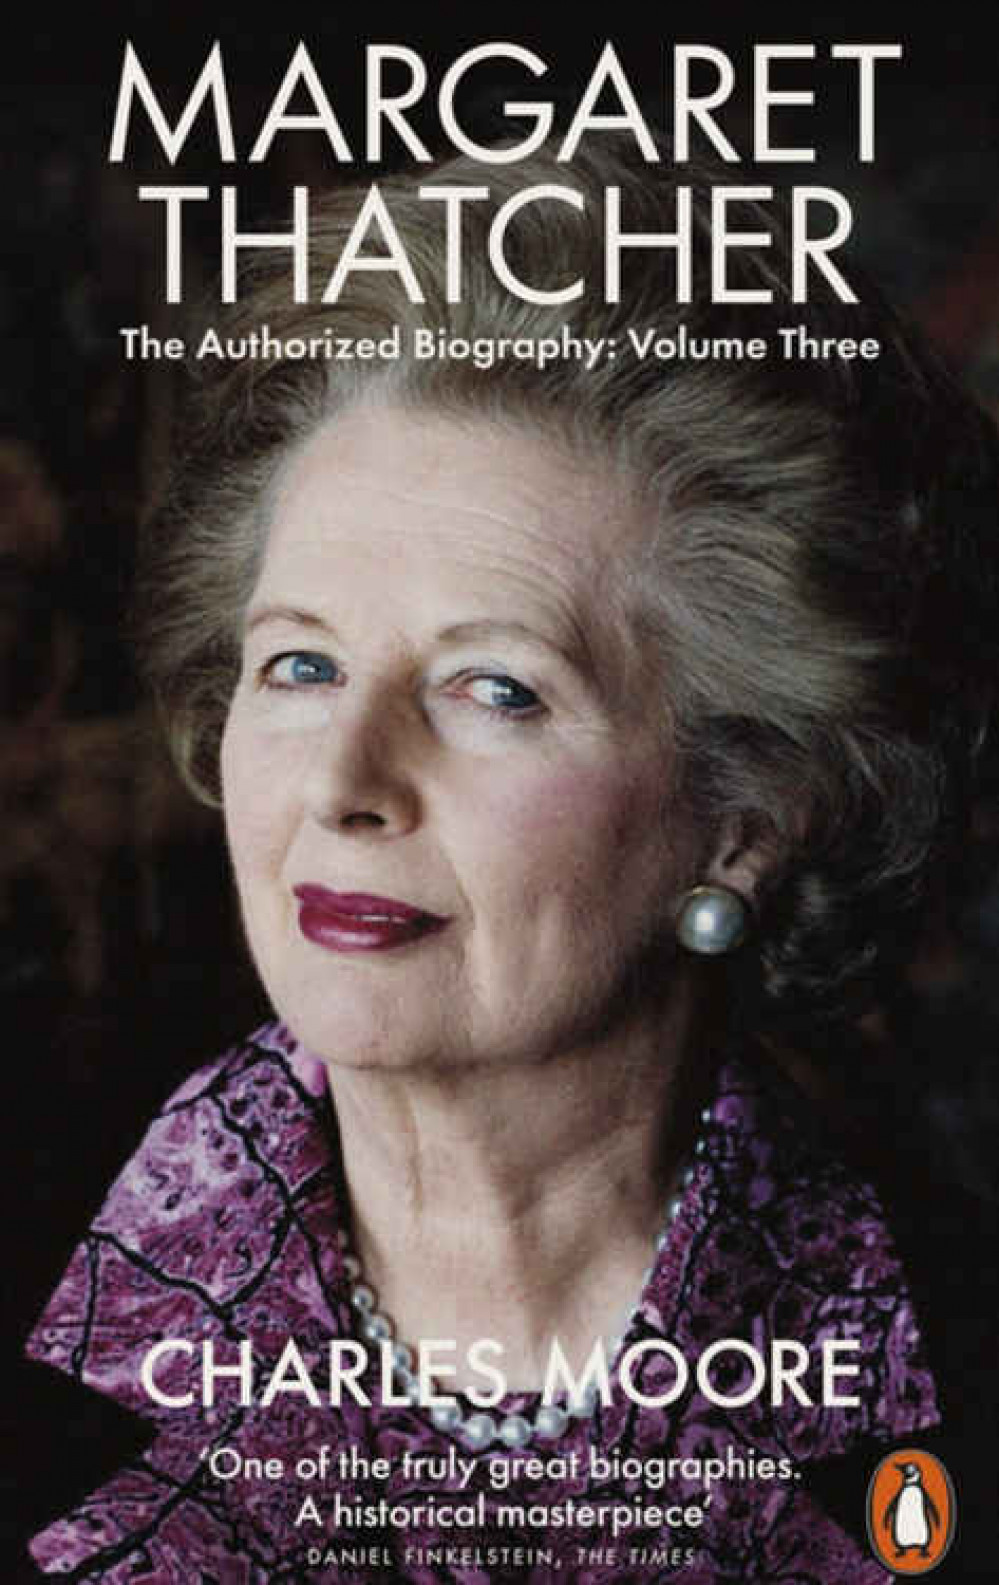 Charles Moore's latest volume of  his biography of Margaret Thatcher